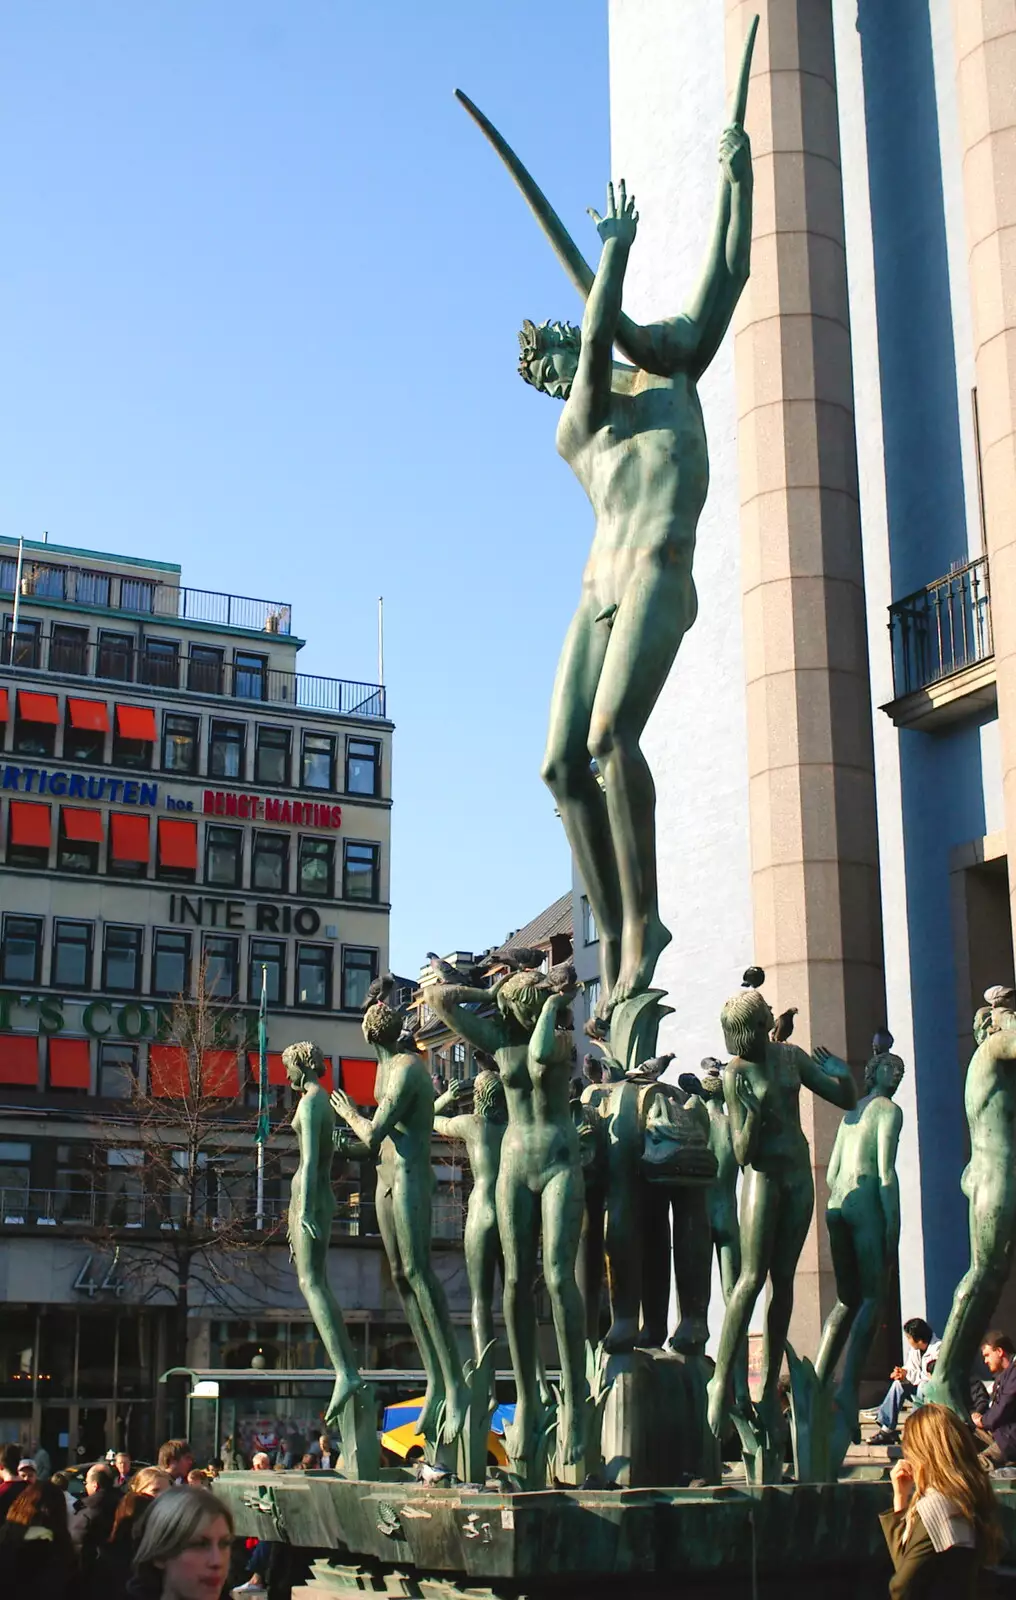 Lots of naked bronze people, from A Postcard From Stockholm: A Working Trip to Sweden - 24th April 2005